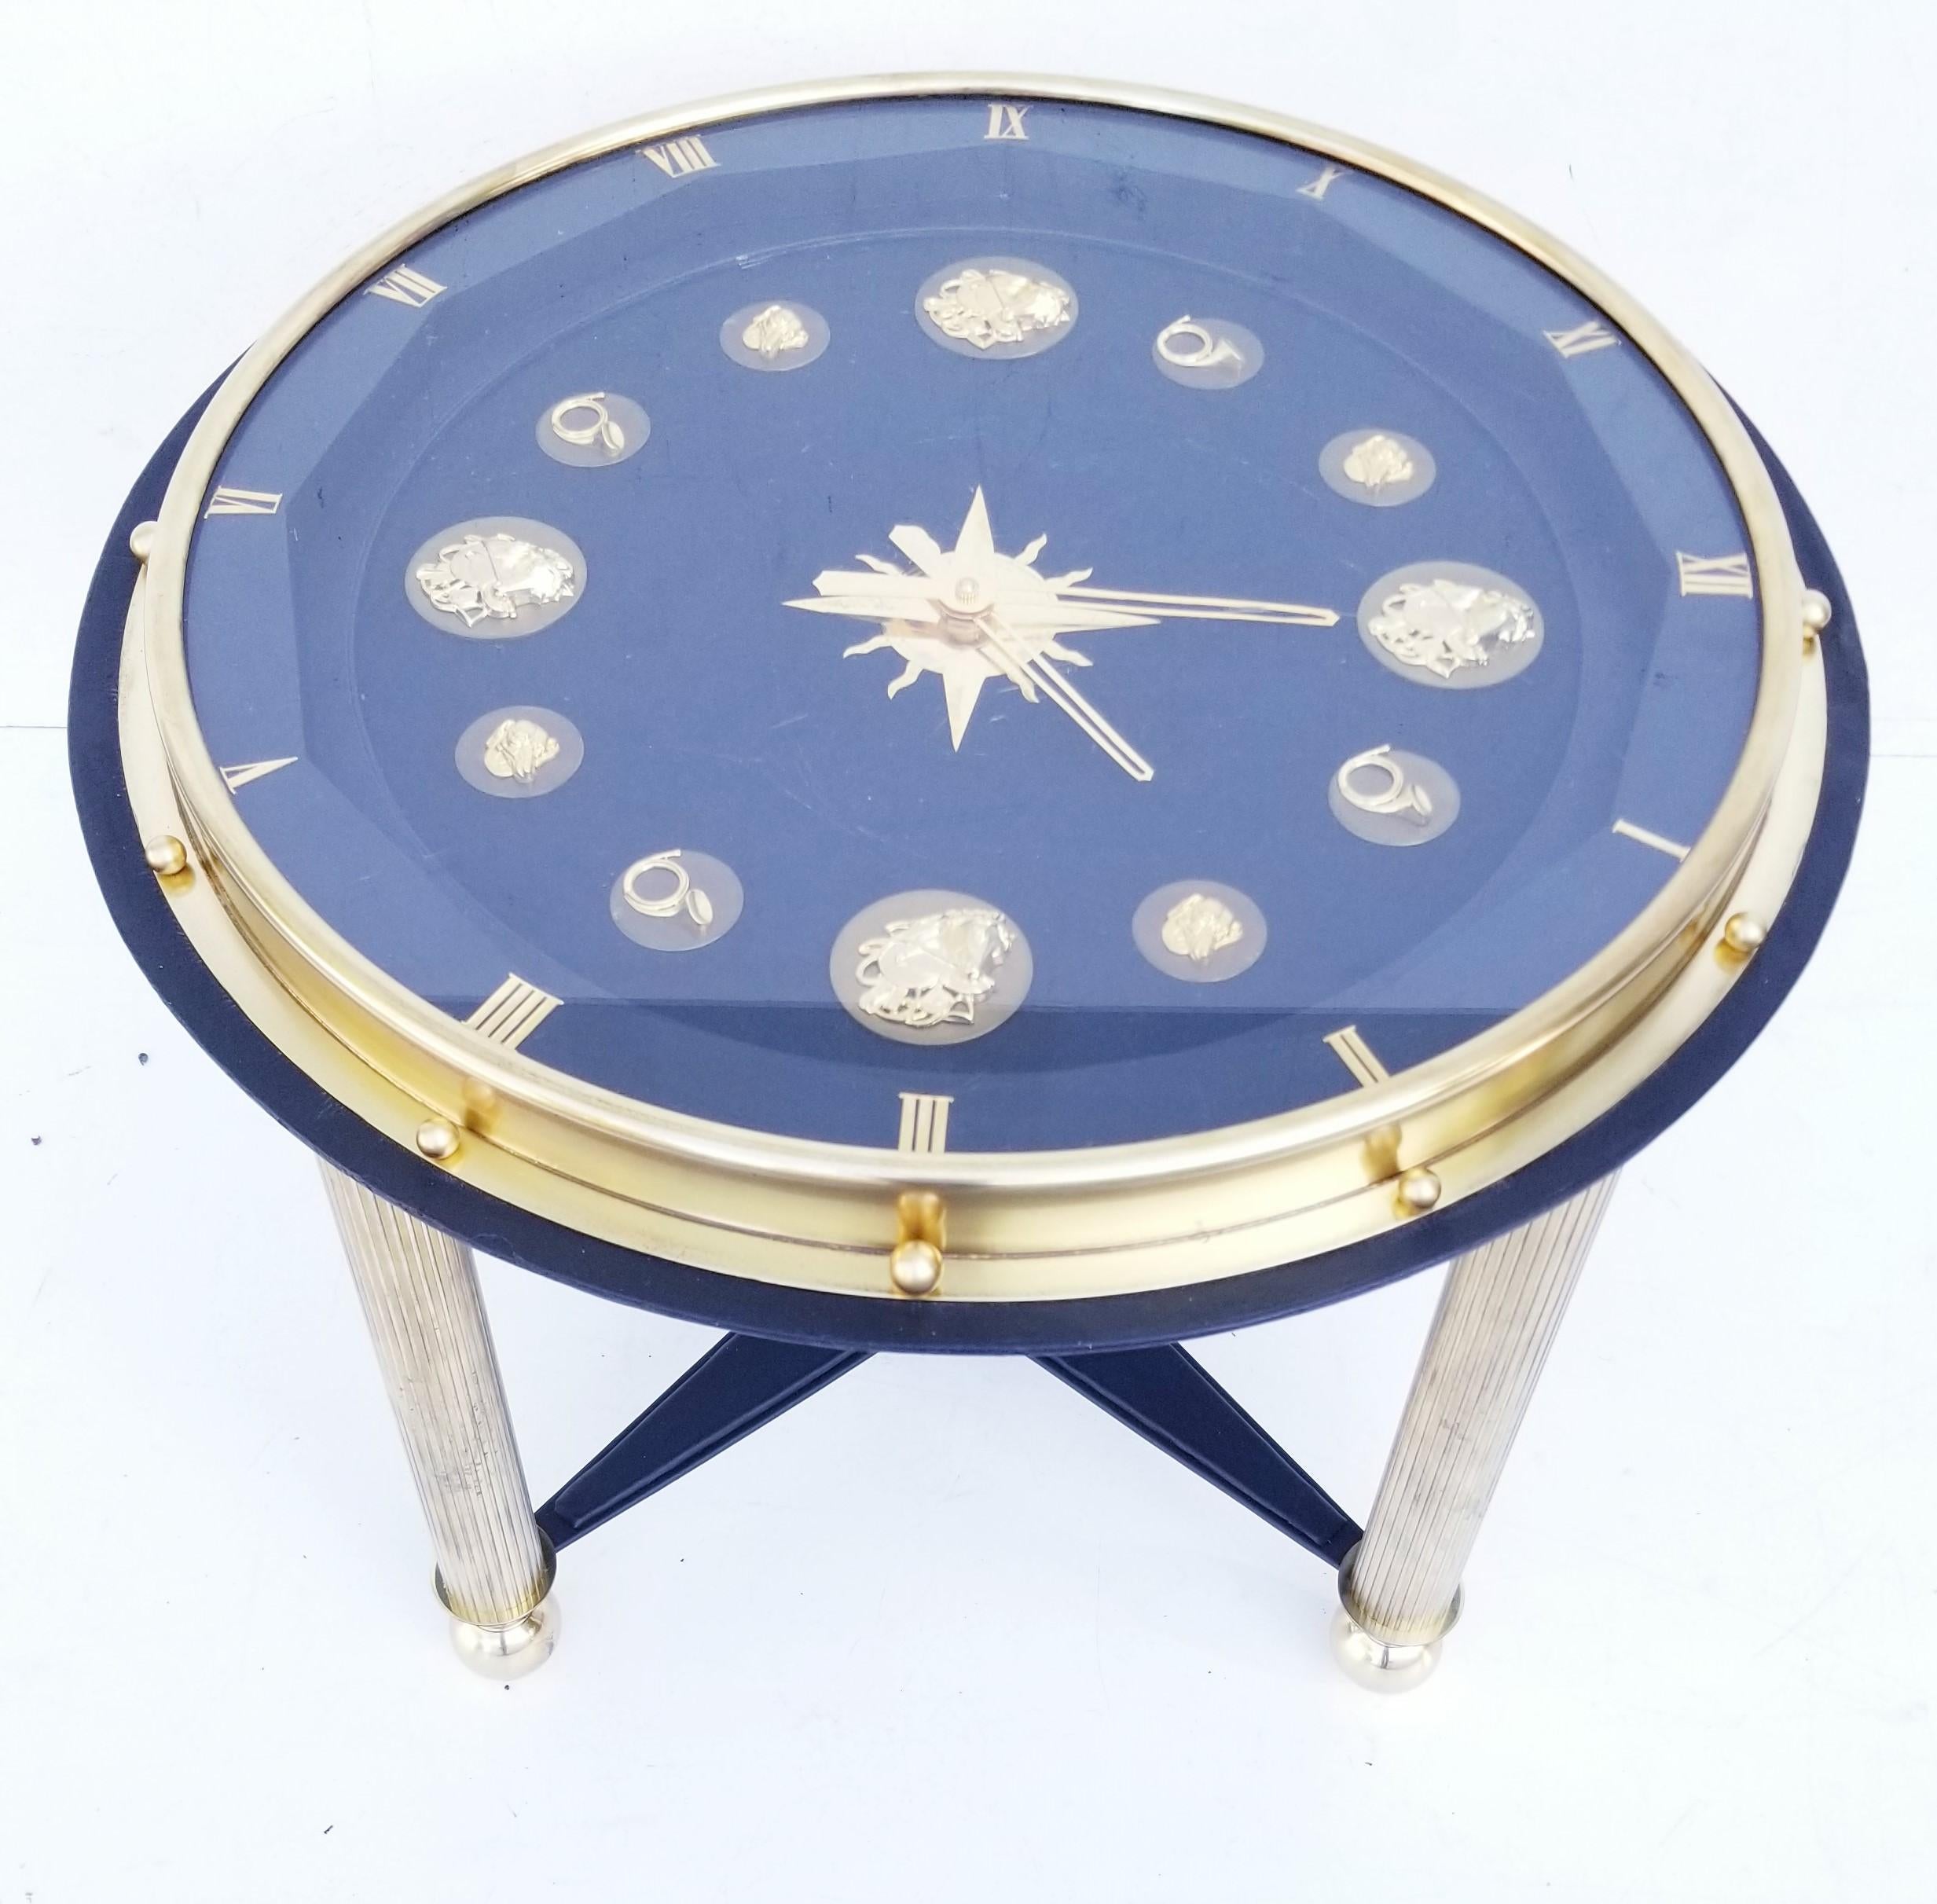 Jacques Adnet style French clock table, circa 1950, animals and music instrument décor, see pictures
Unusual piece, bronze, brass and faux leather.